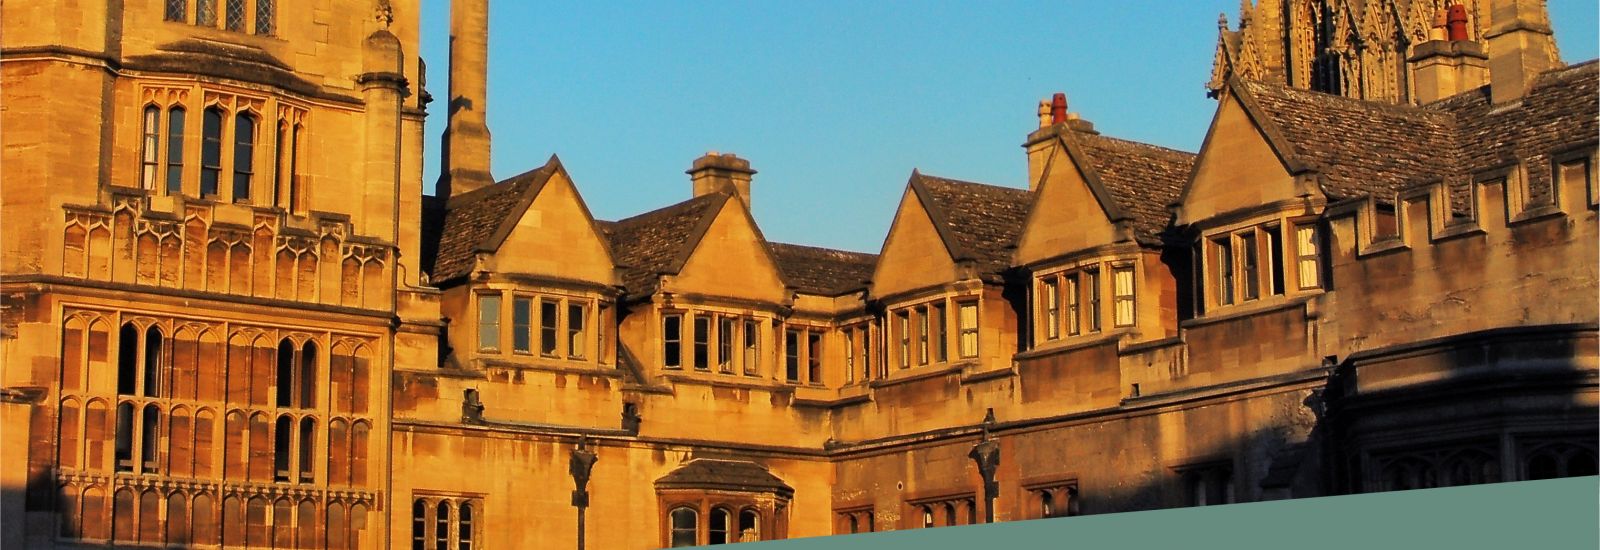 Brasenose College at golden hour